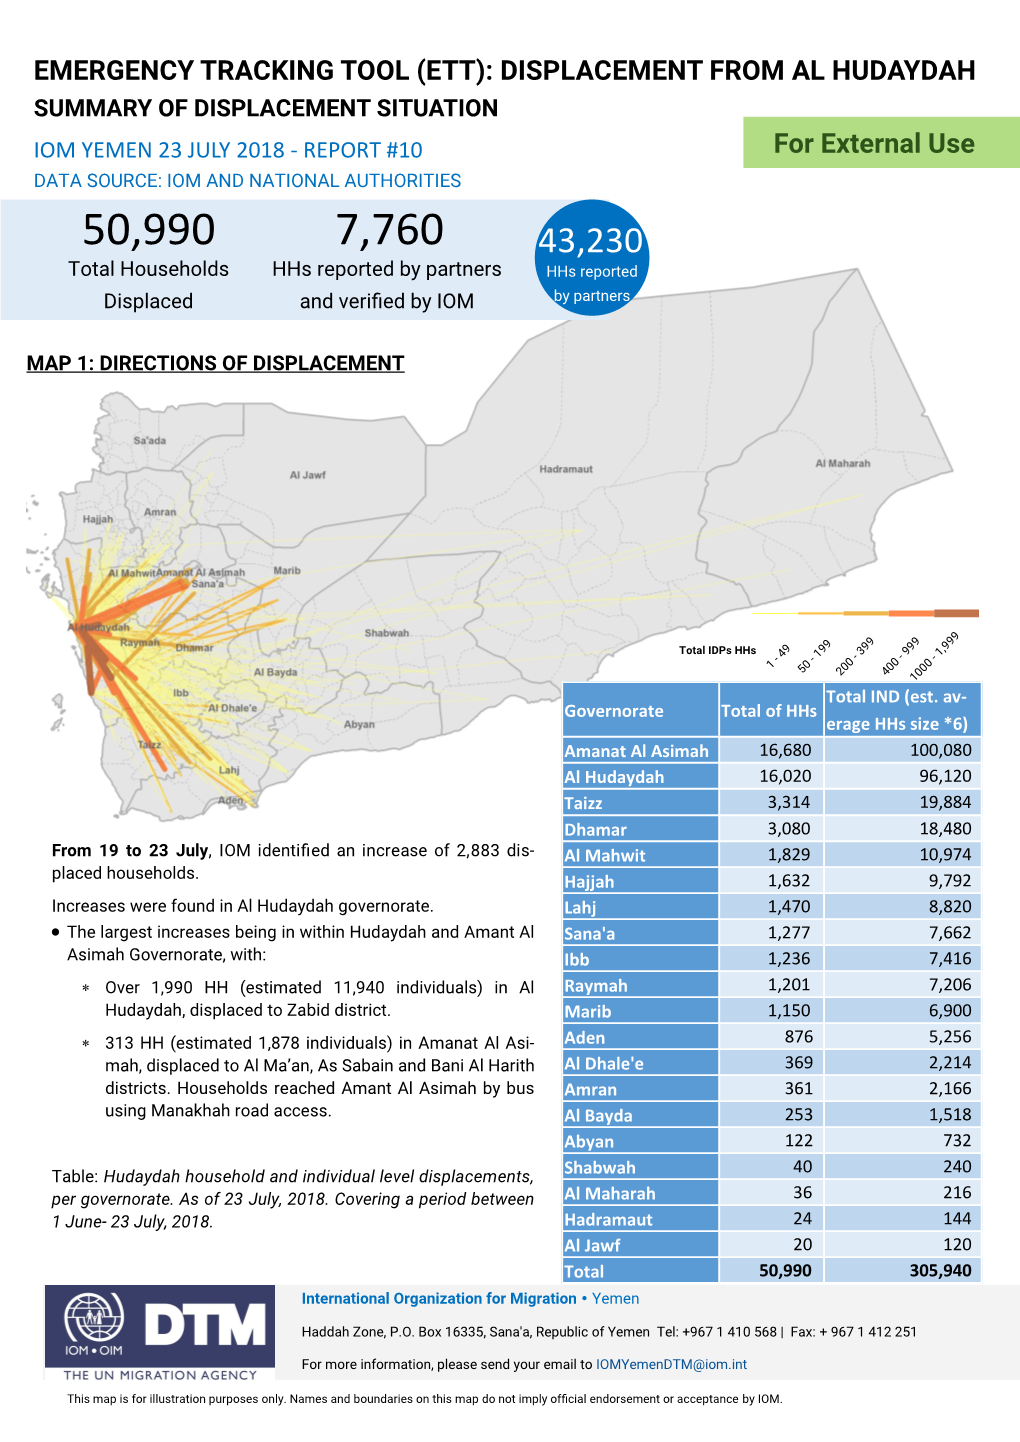 Emergency Tracking Tool (Ett): Displacement from Al Hudaydah Summary of Displacement Situation